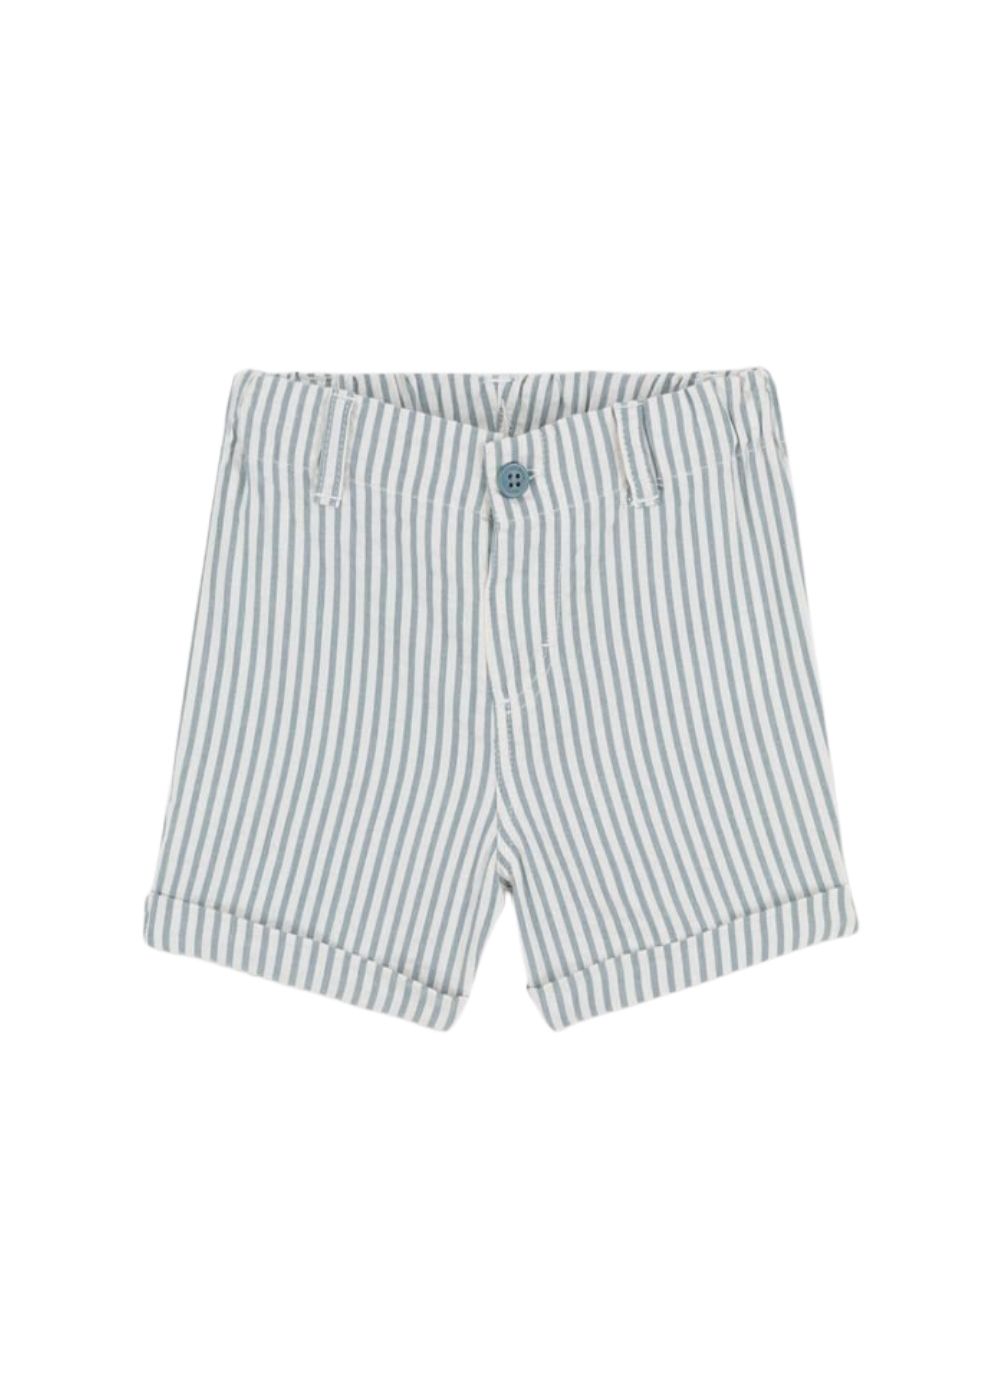 Featured image for “Petit Bateau Shorts in seersucker”